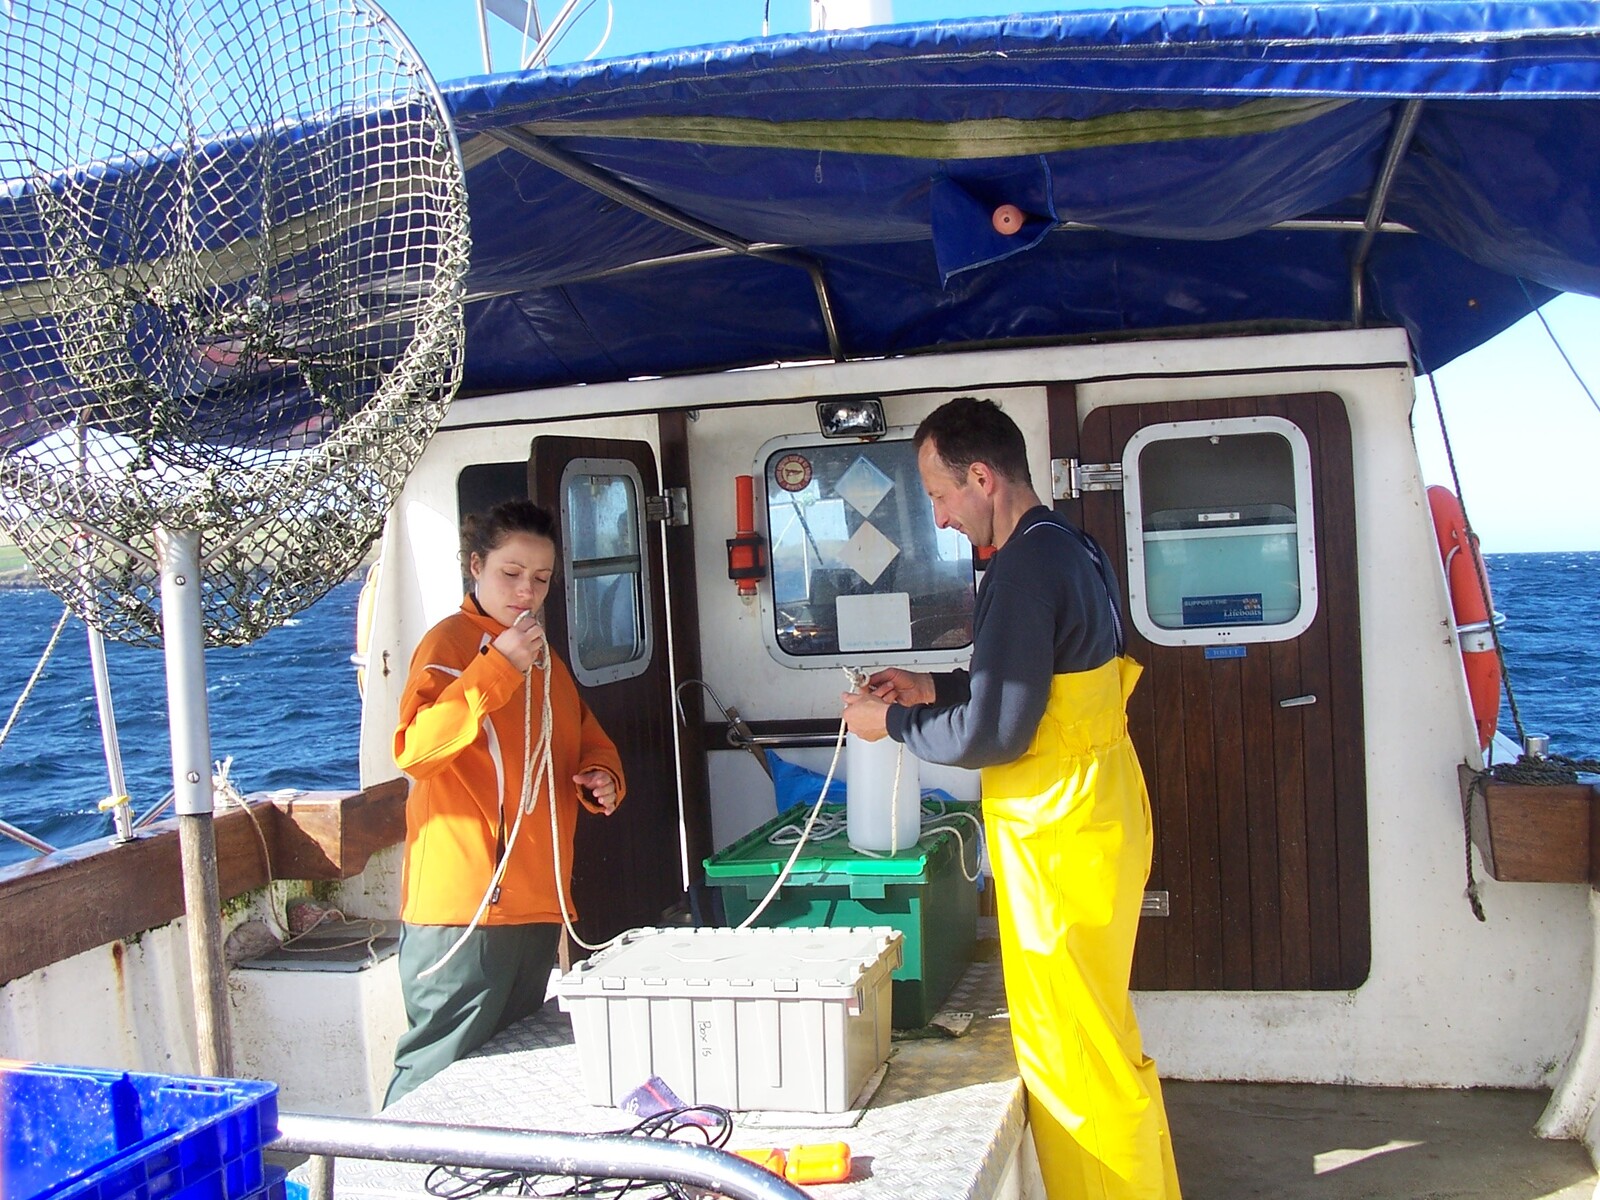 Sailing out of Scrabster Harbour, North Scotland, to collect water samples. On the right is Associate Professor François Muller, on the left is his colleague Dr Sílvia Batchelli of the University of the Highlands and Islands. (Photo provided by François Muller)